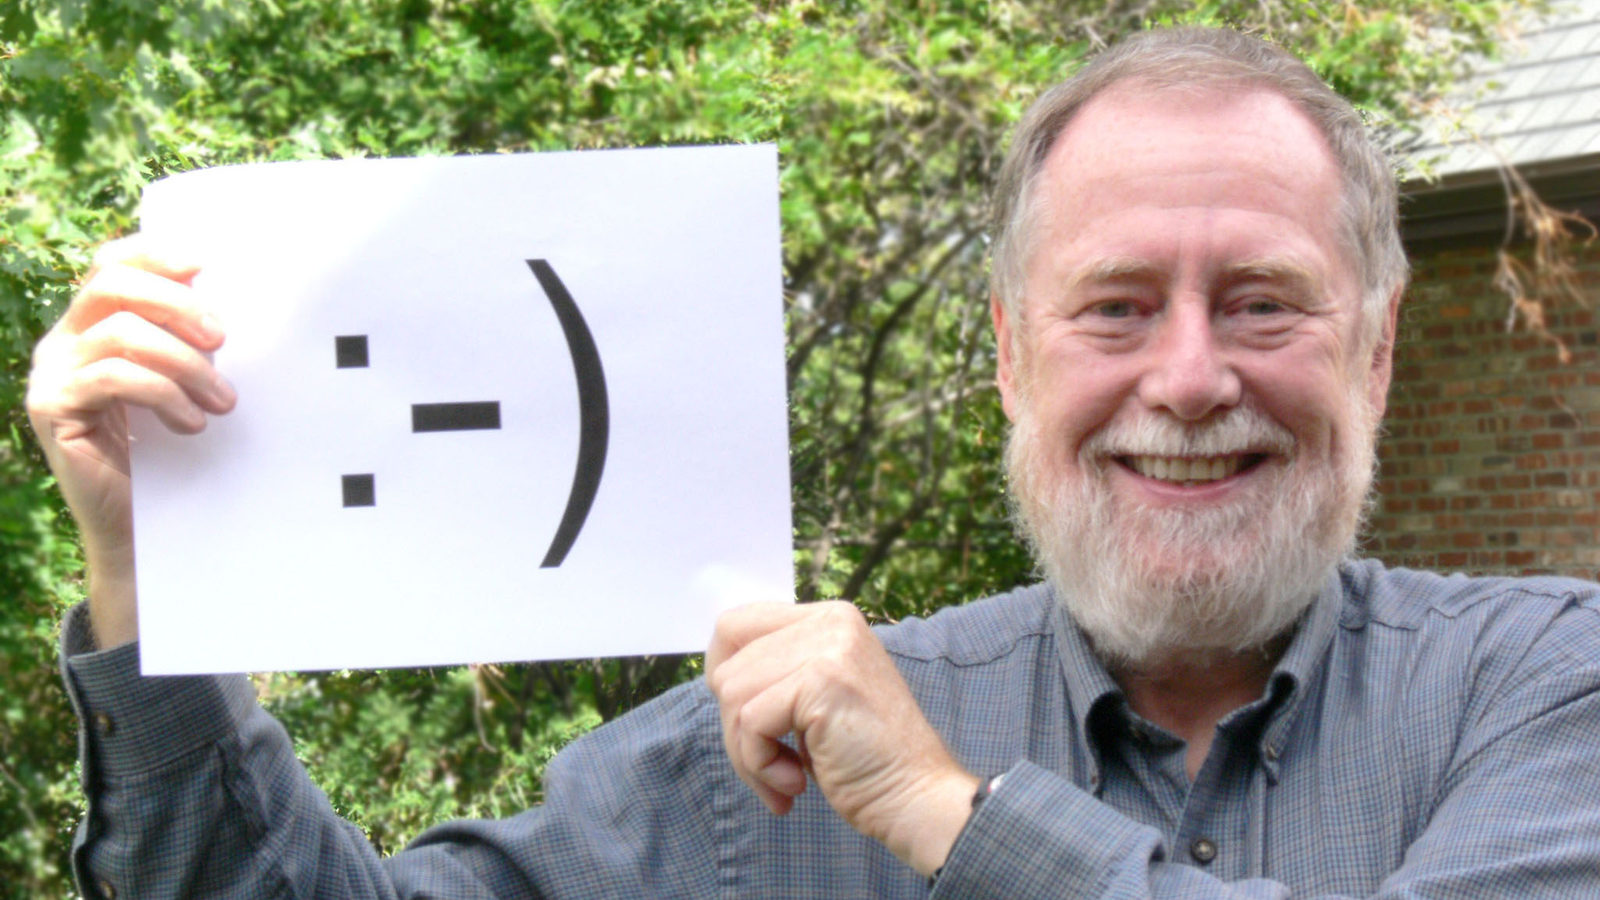 Photo of Scott Fahlman holding smiley face sign